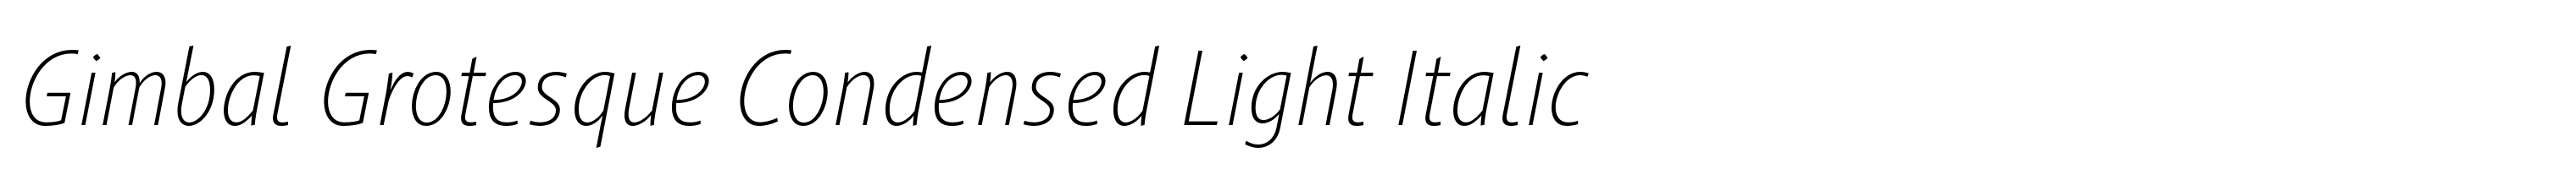 Gimbal Grotesque Condensed Light Italic